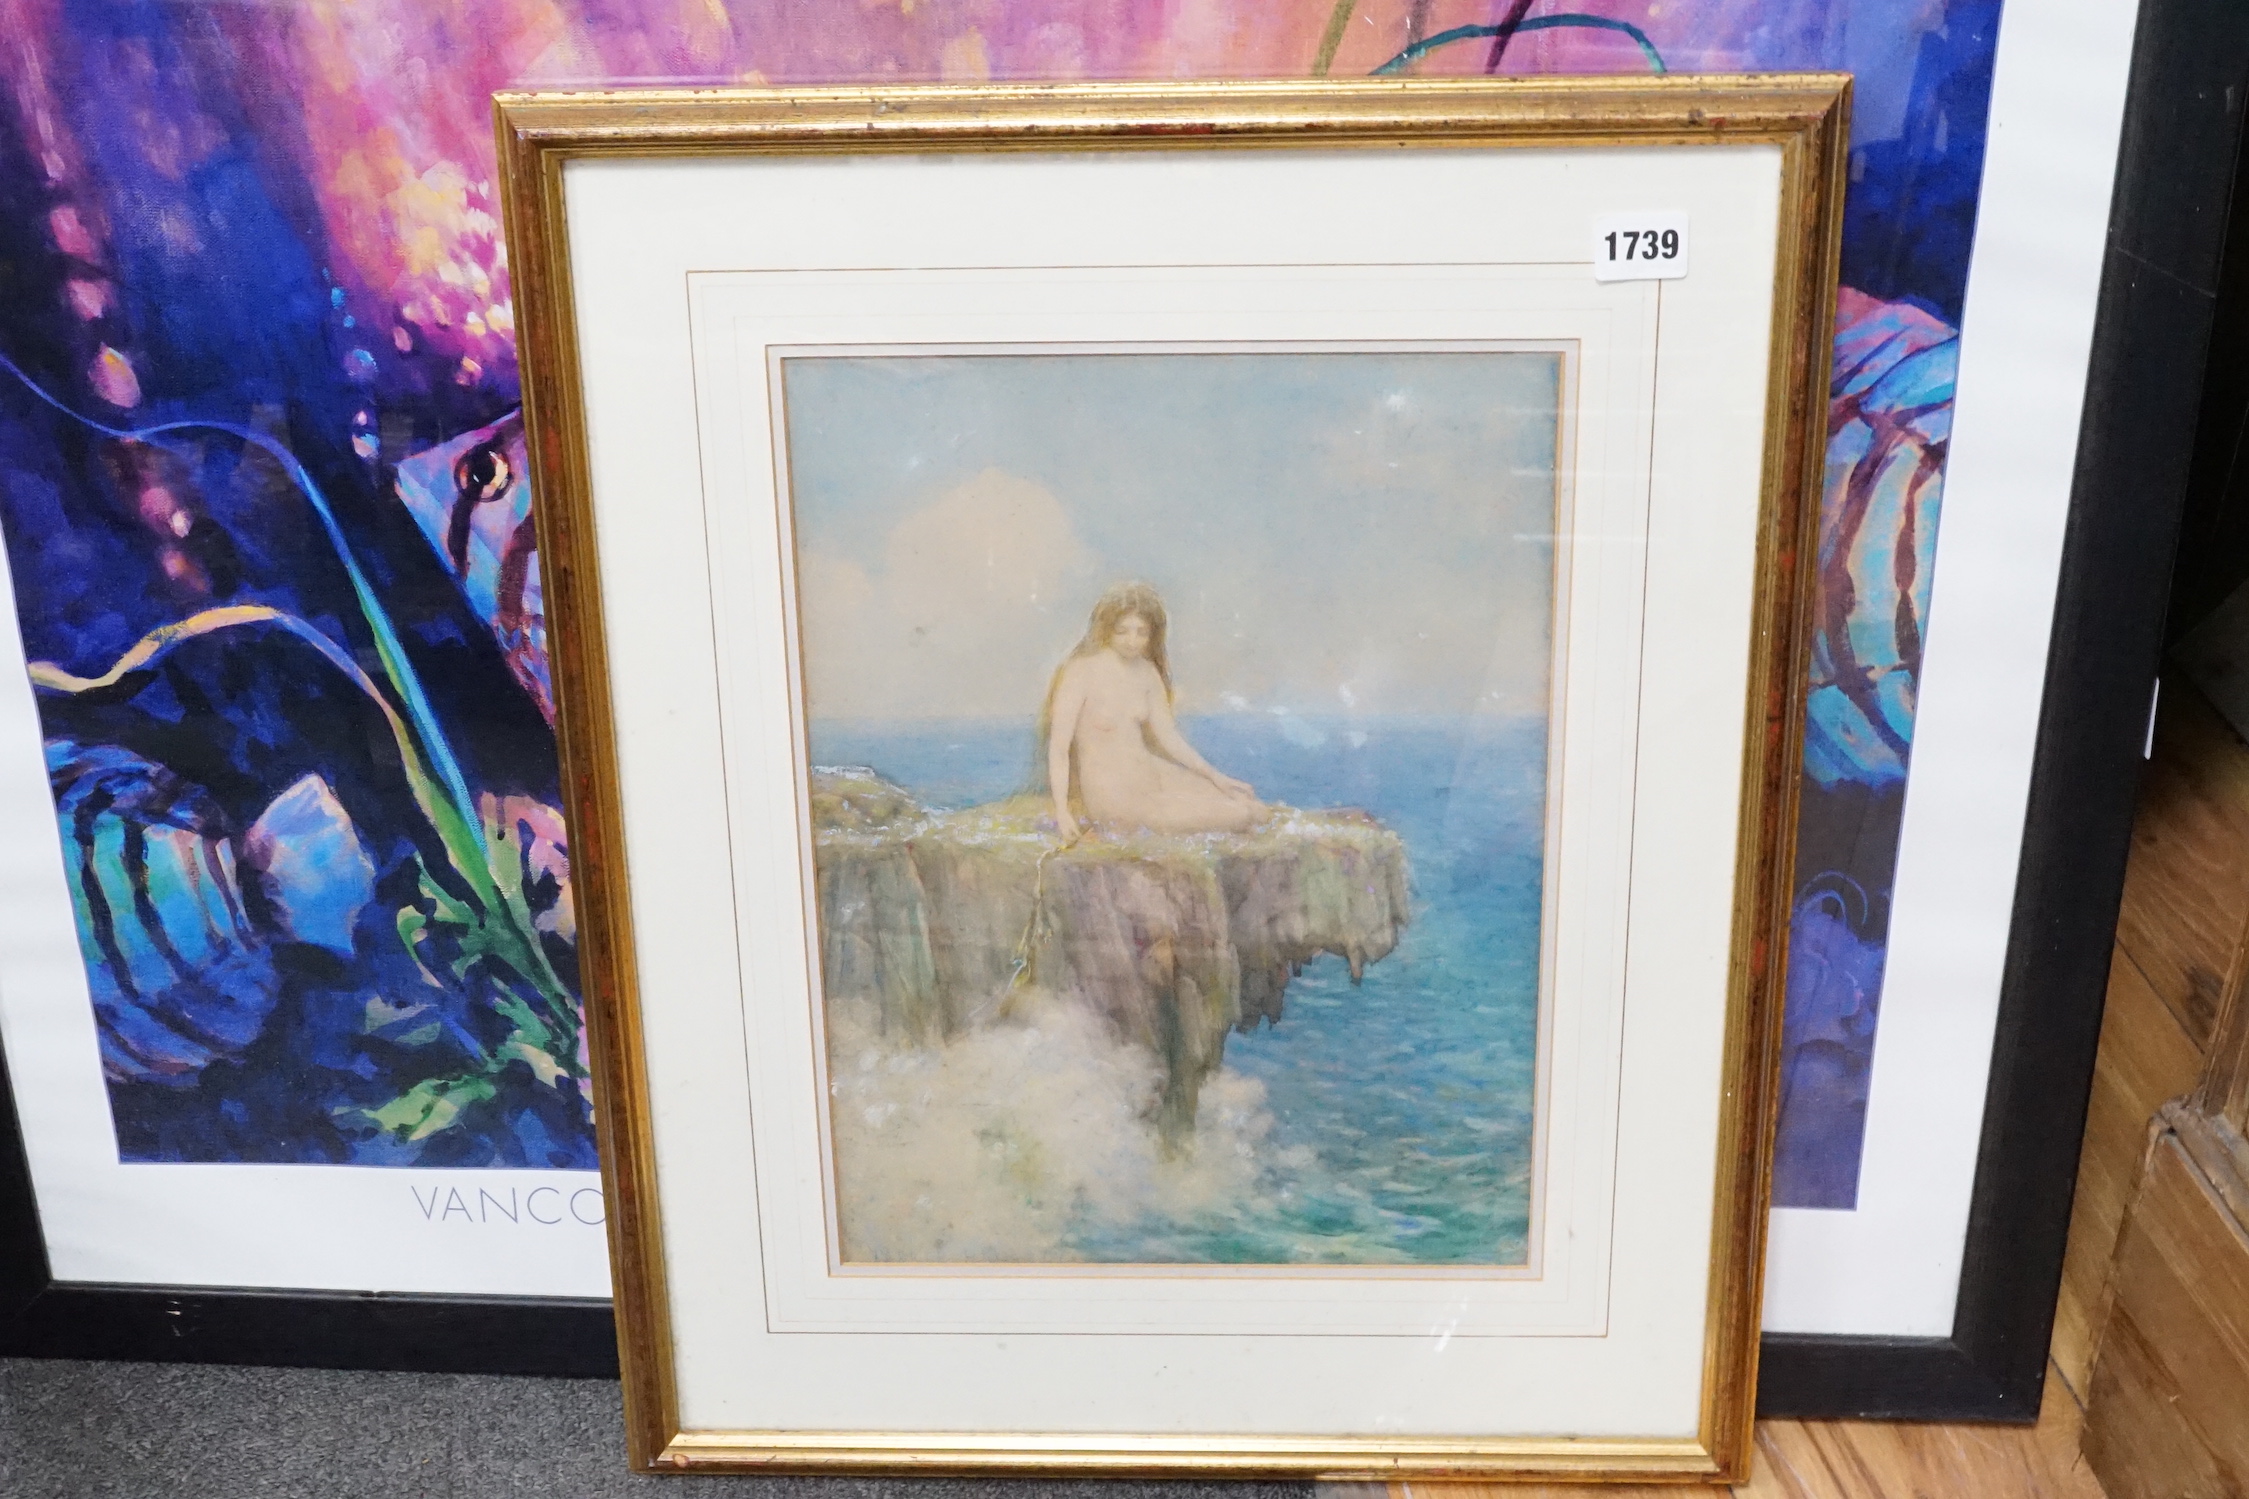 Parker Hagerty (1859-1934), watercolour, Siren on the rocks, signed, 36 x 27cm